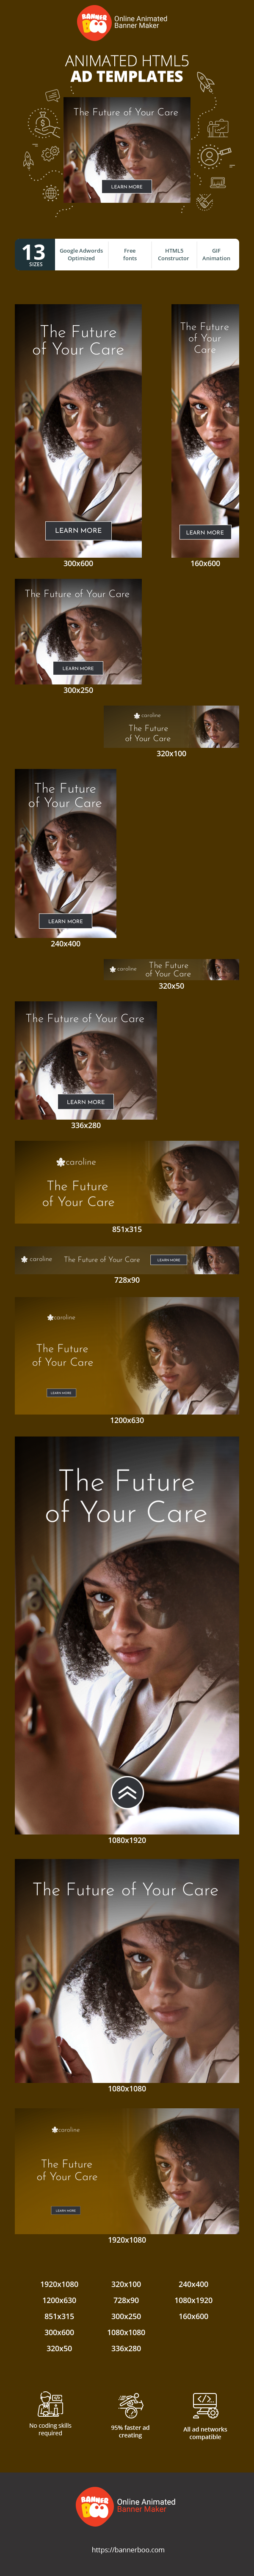 Banner ad template — The Future Of Your Care — Spa